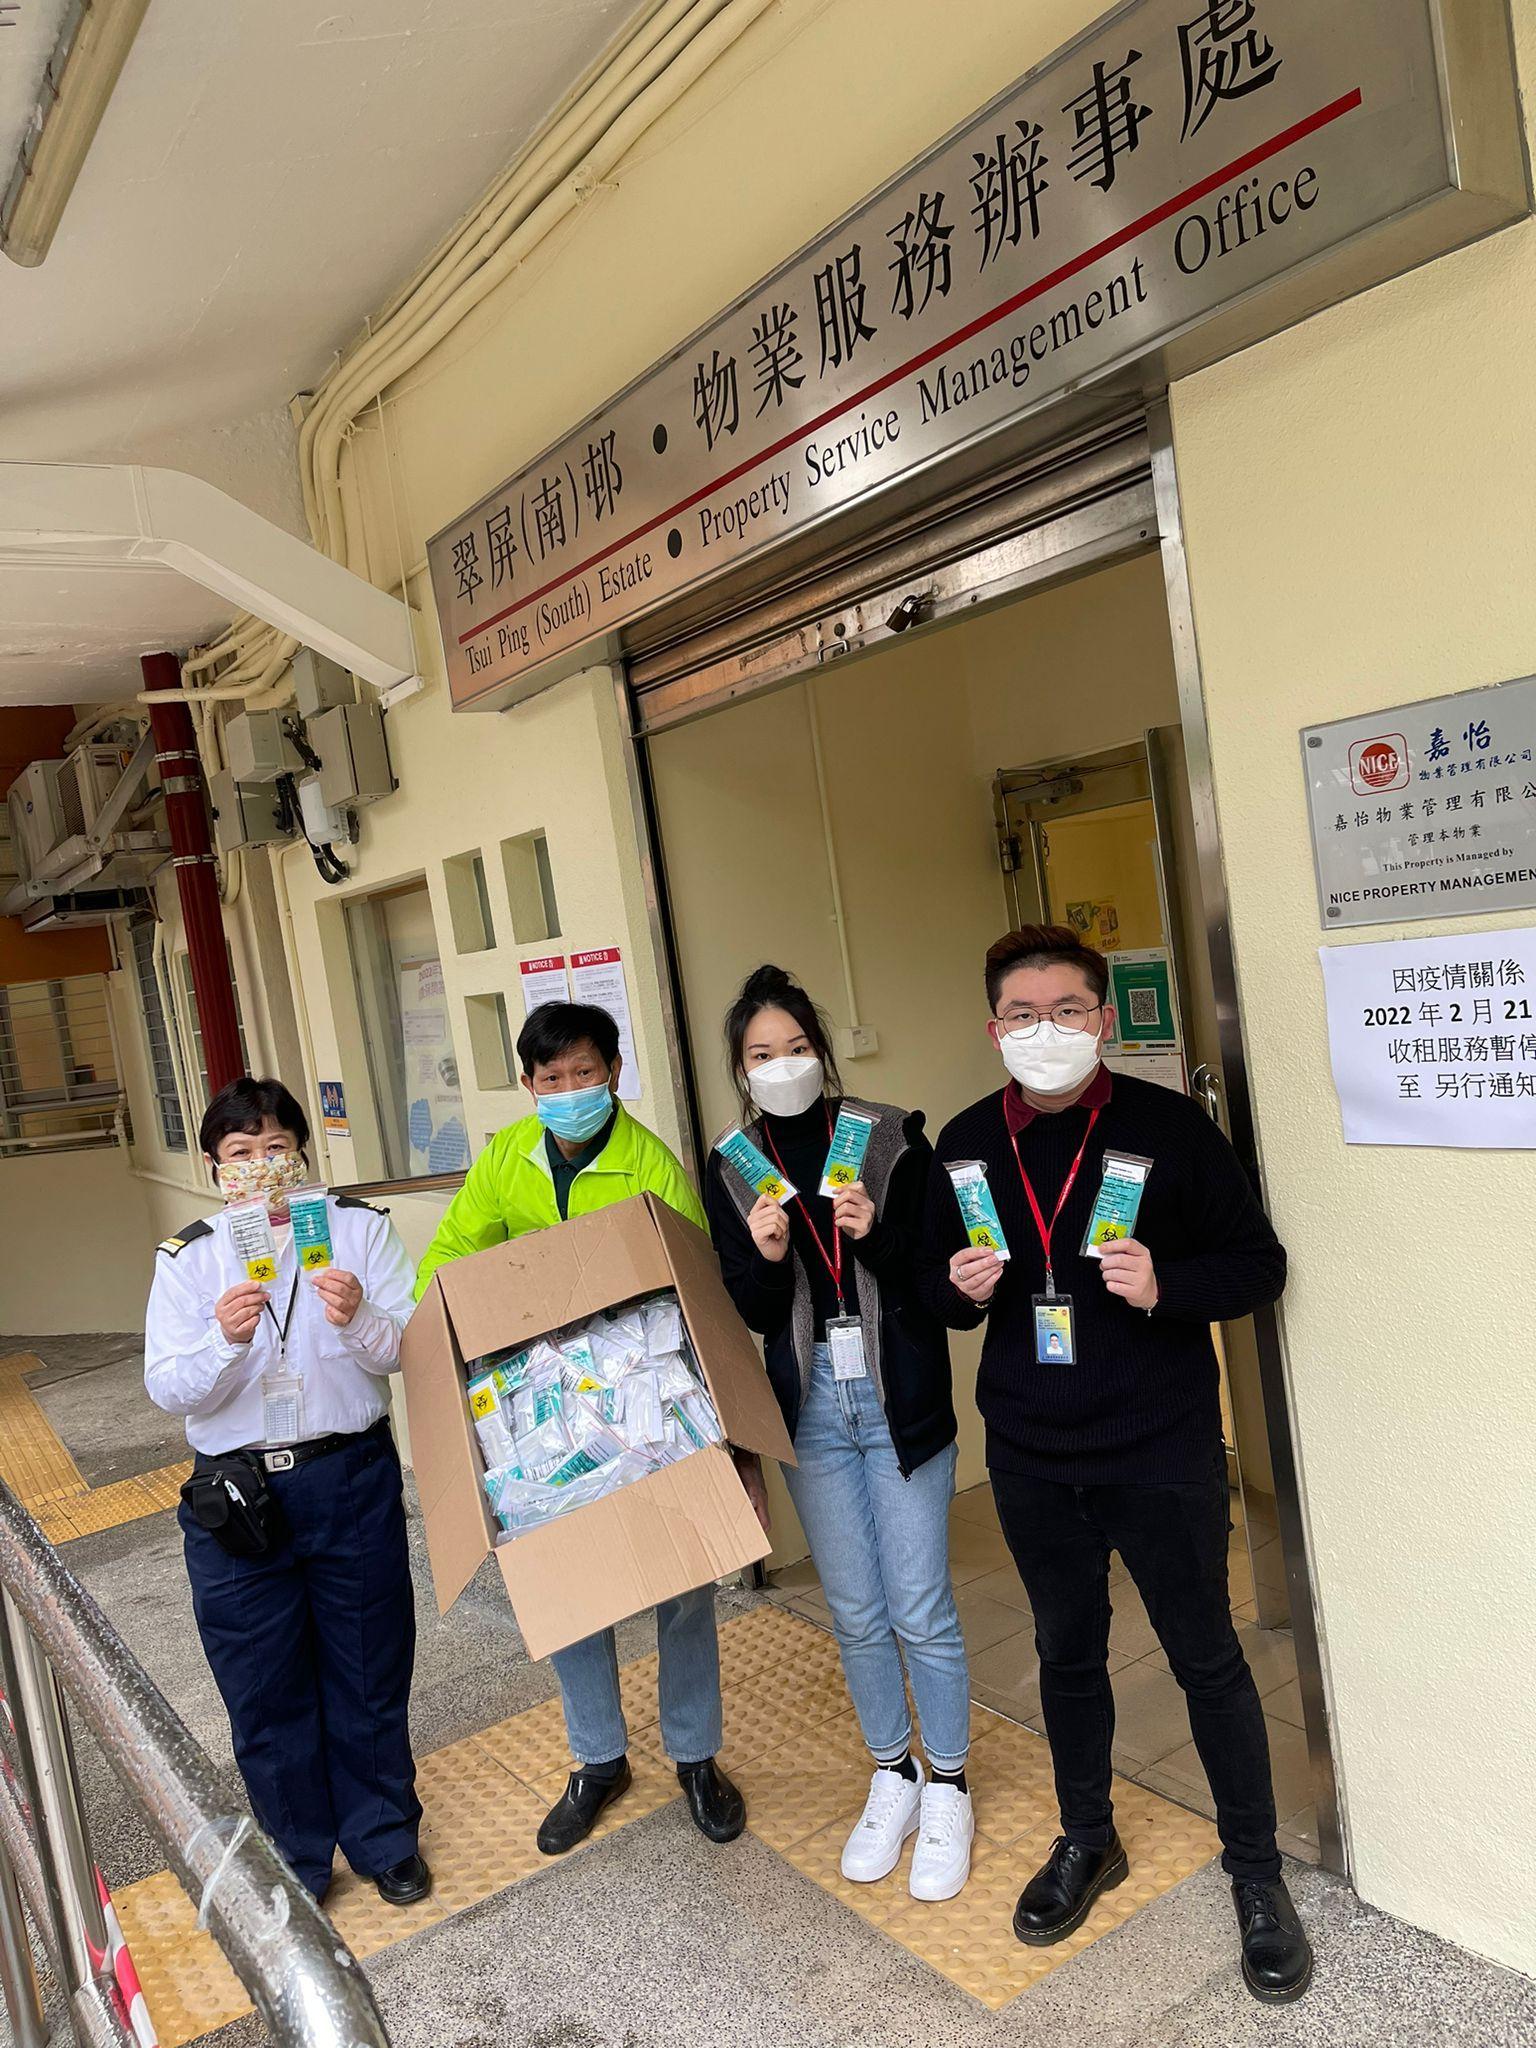 The Kwun Tong District Office today (February 21) distributed rapid test kits to cleansing workers and property management staff working in Tsui Ping (South) Estate for voluntary testing.